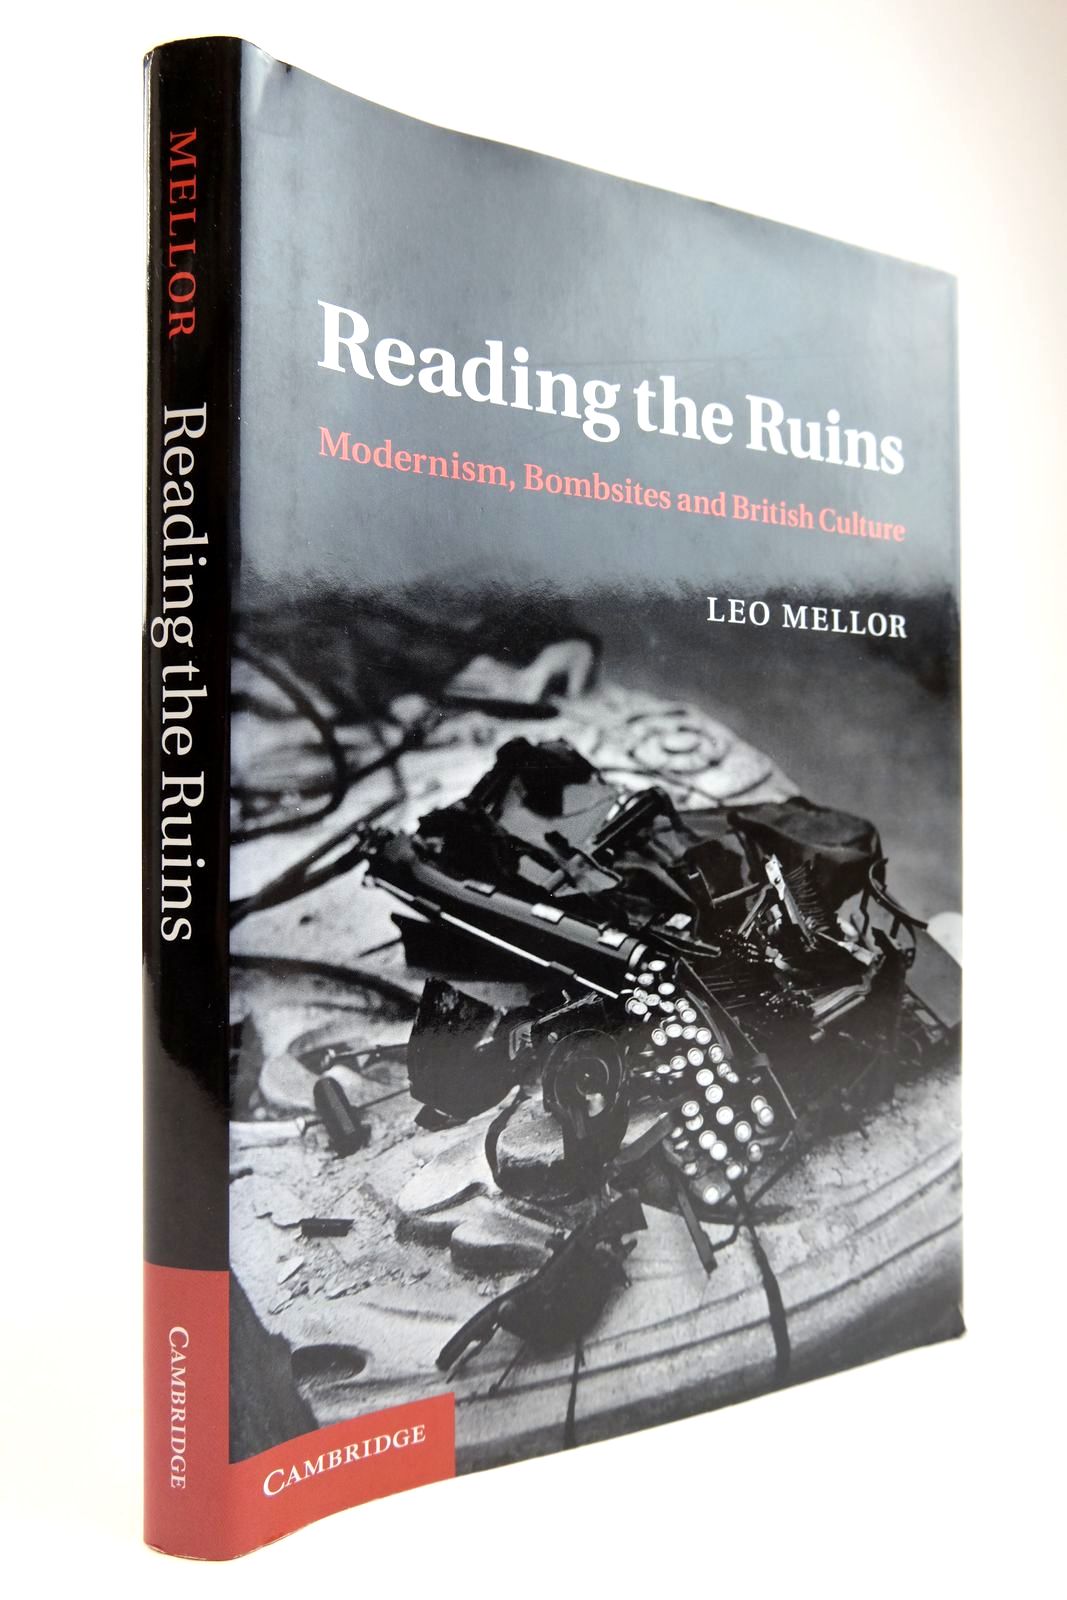 Photo of READING THE RUINS: MODERNISM, BOMBSITES AND BRITISH CULTURE written by Mellor, Leo published by Cambridge University Press (STOCK CODE: 2134010)  for sale by Stella & Rose's Books